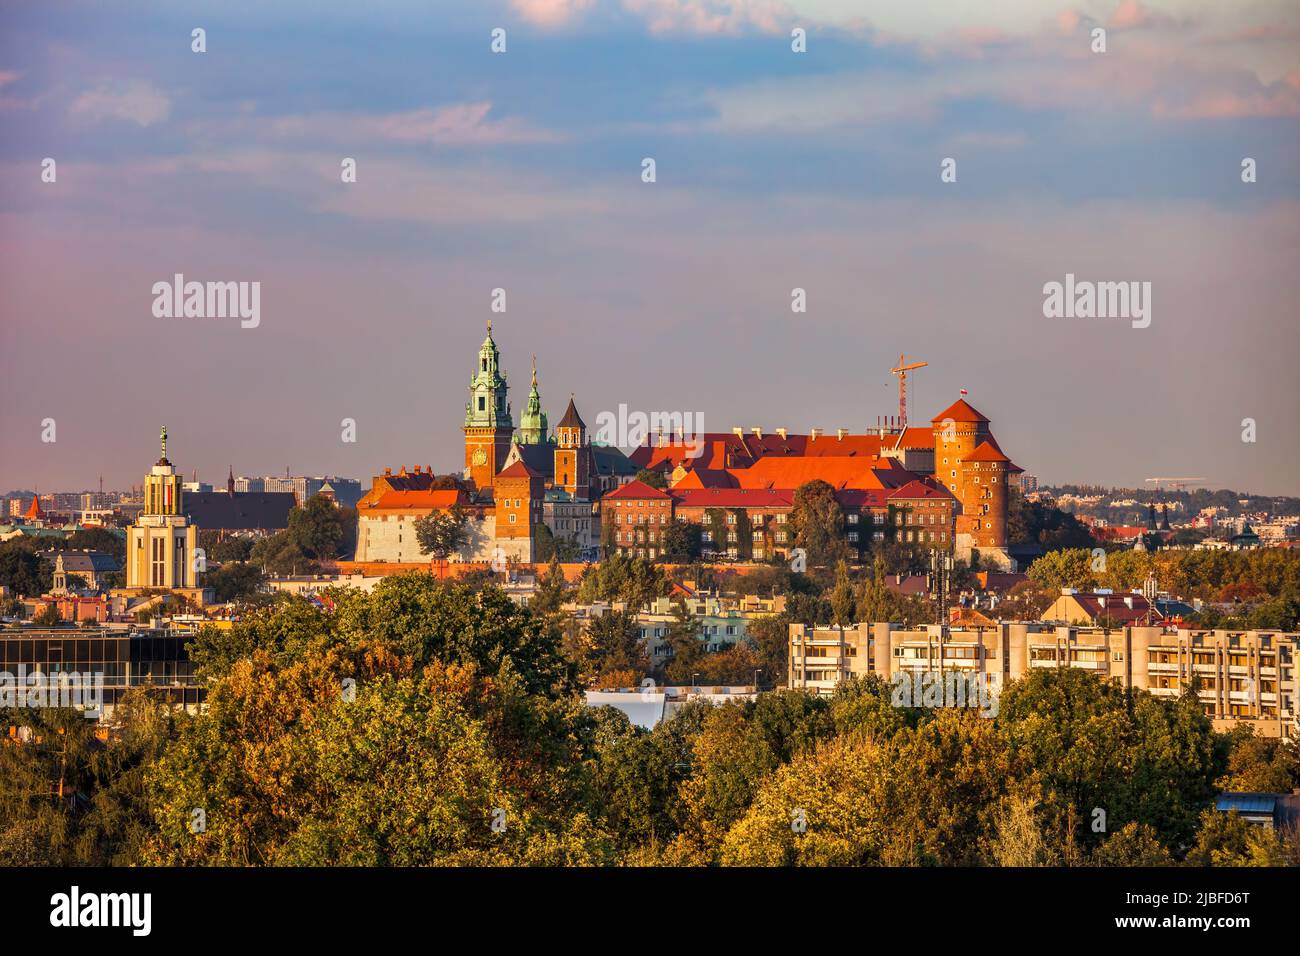 City of Krakow in Poland. Cityscape with the Wawel Royal Castle at sunset. Stock Photo